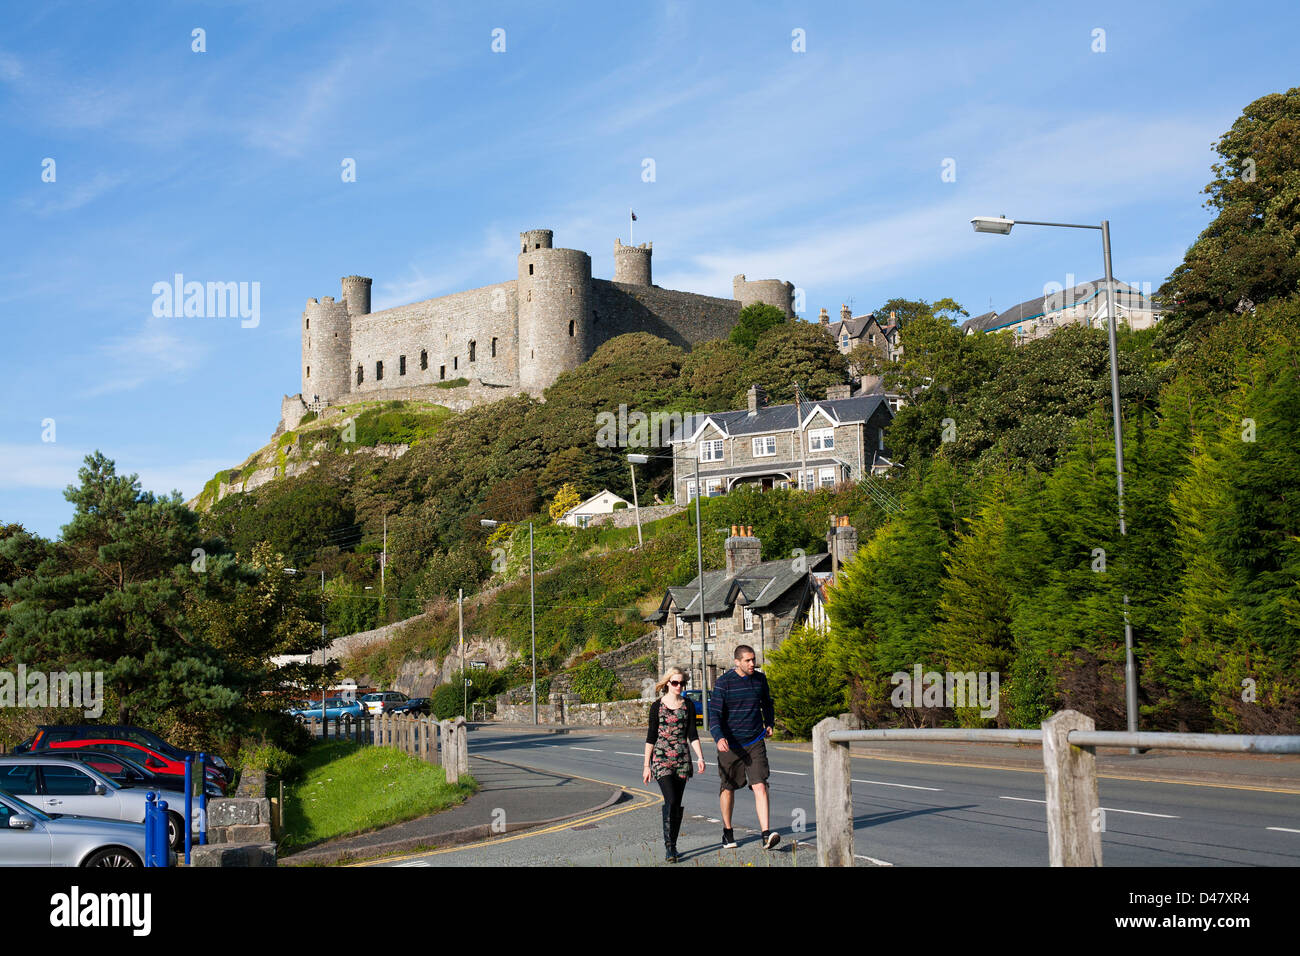 Two tourists walk past a historic Welsh Castle in North Wales on a sunny day Stock Photo